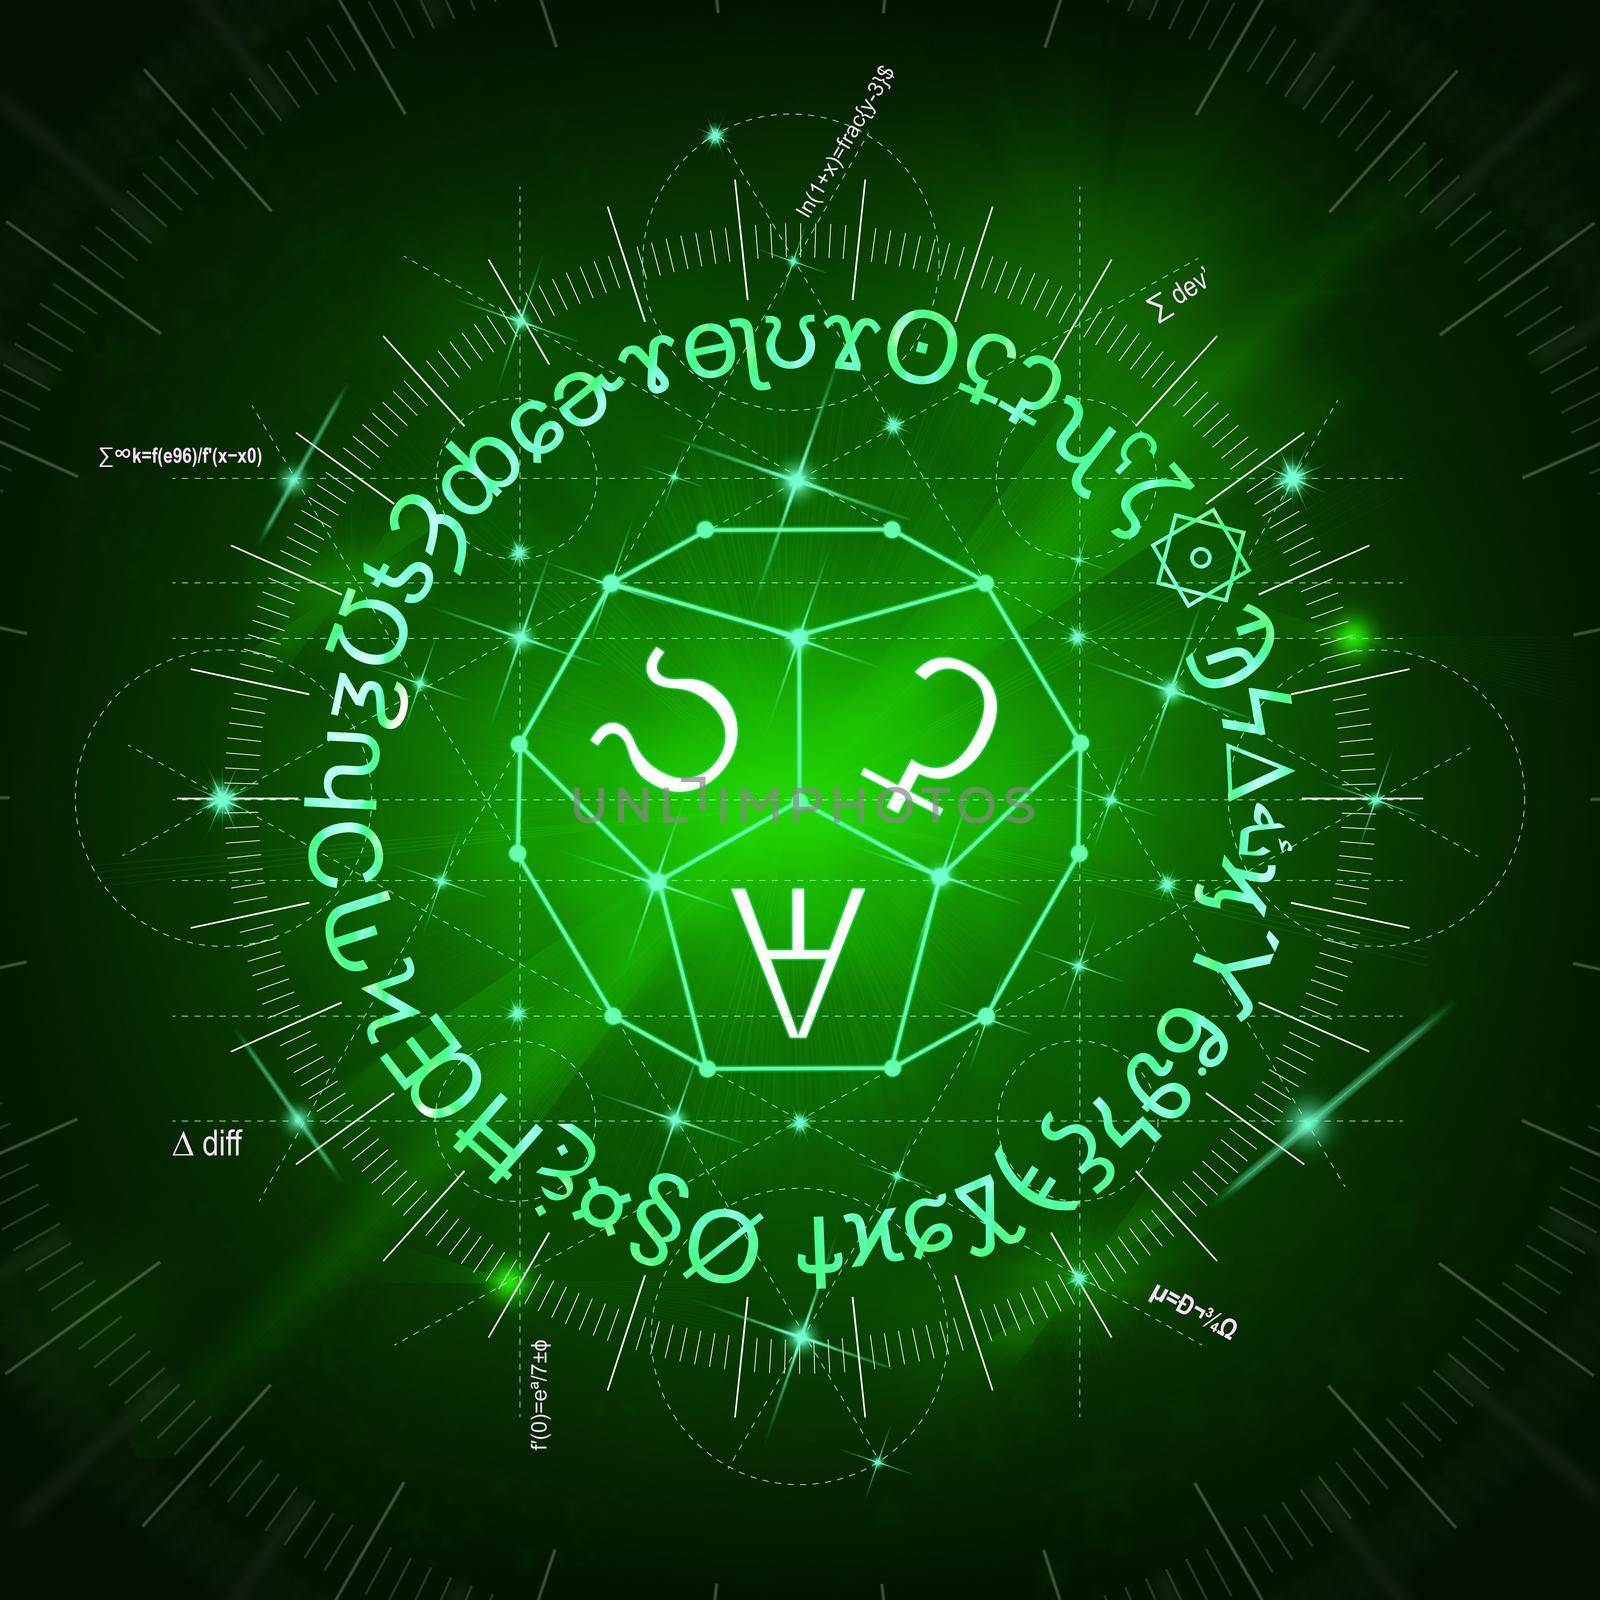 Abstract green background of glowing magic spells, formulas, signs, clockwork and sacred symbols